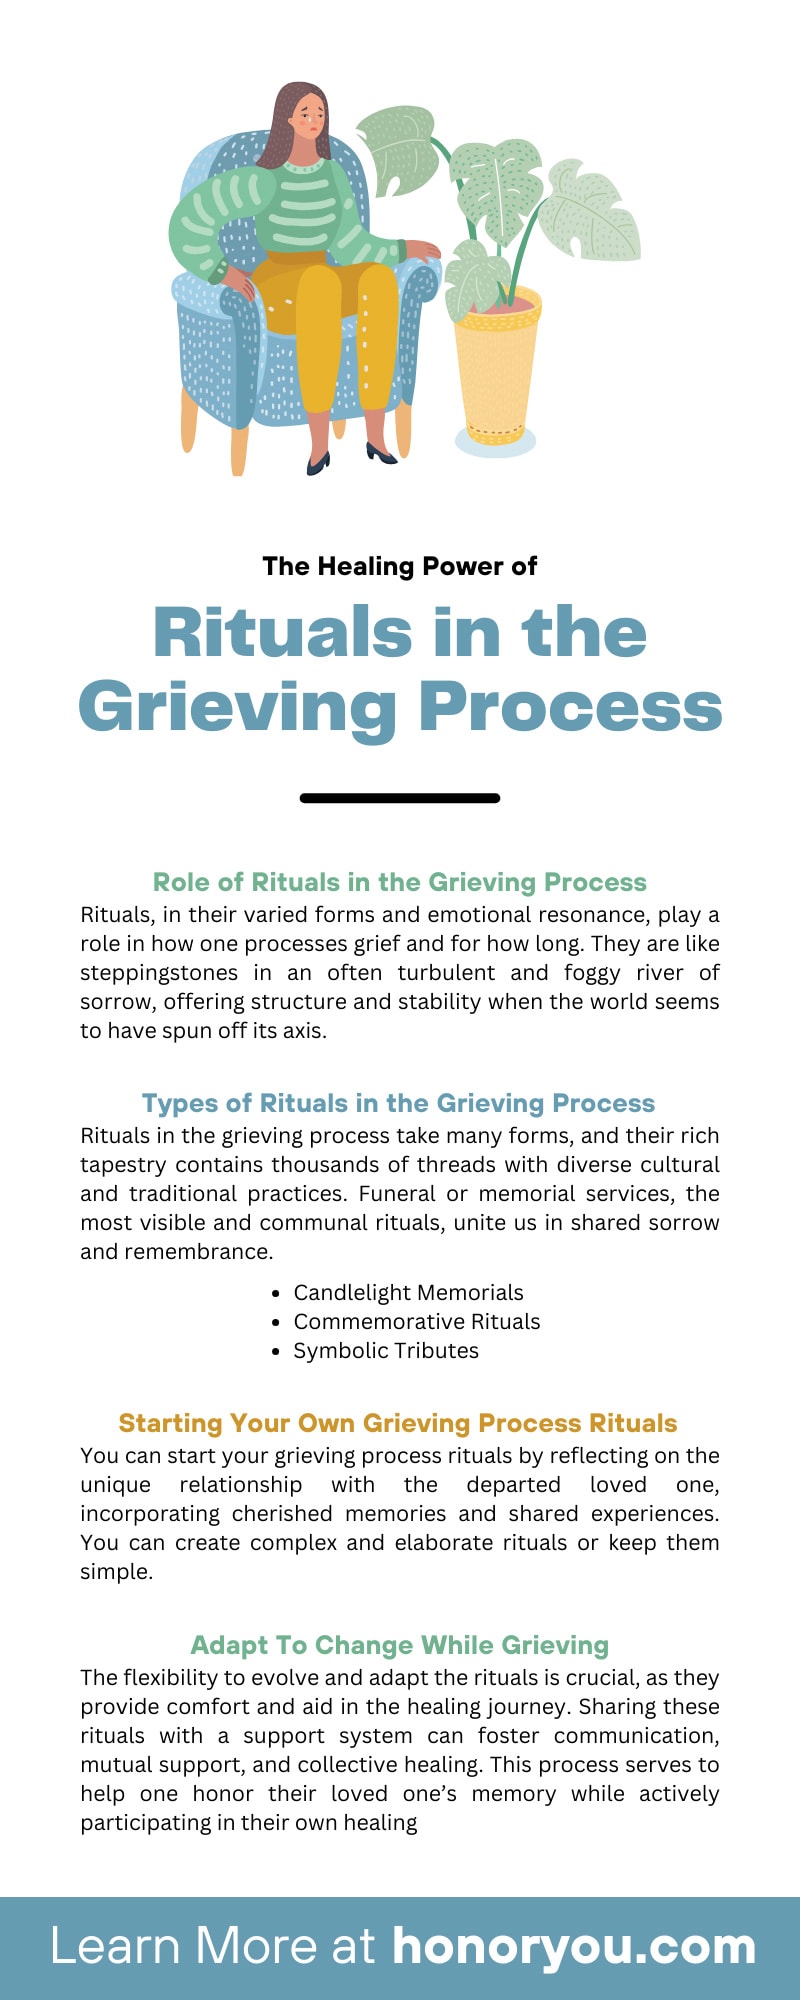 The Healing Power of Rituals in the Grieving Process